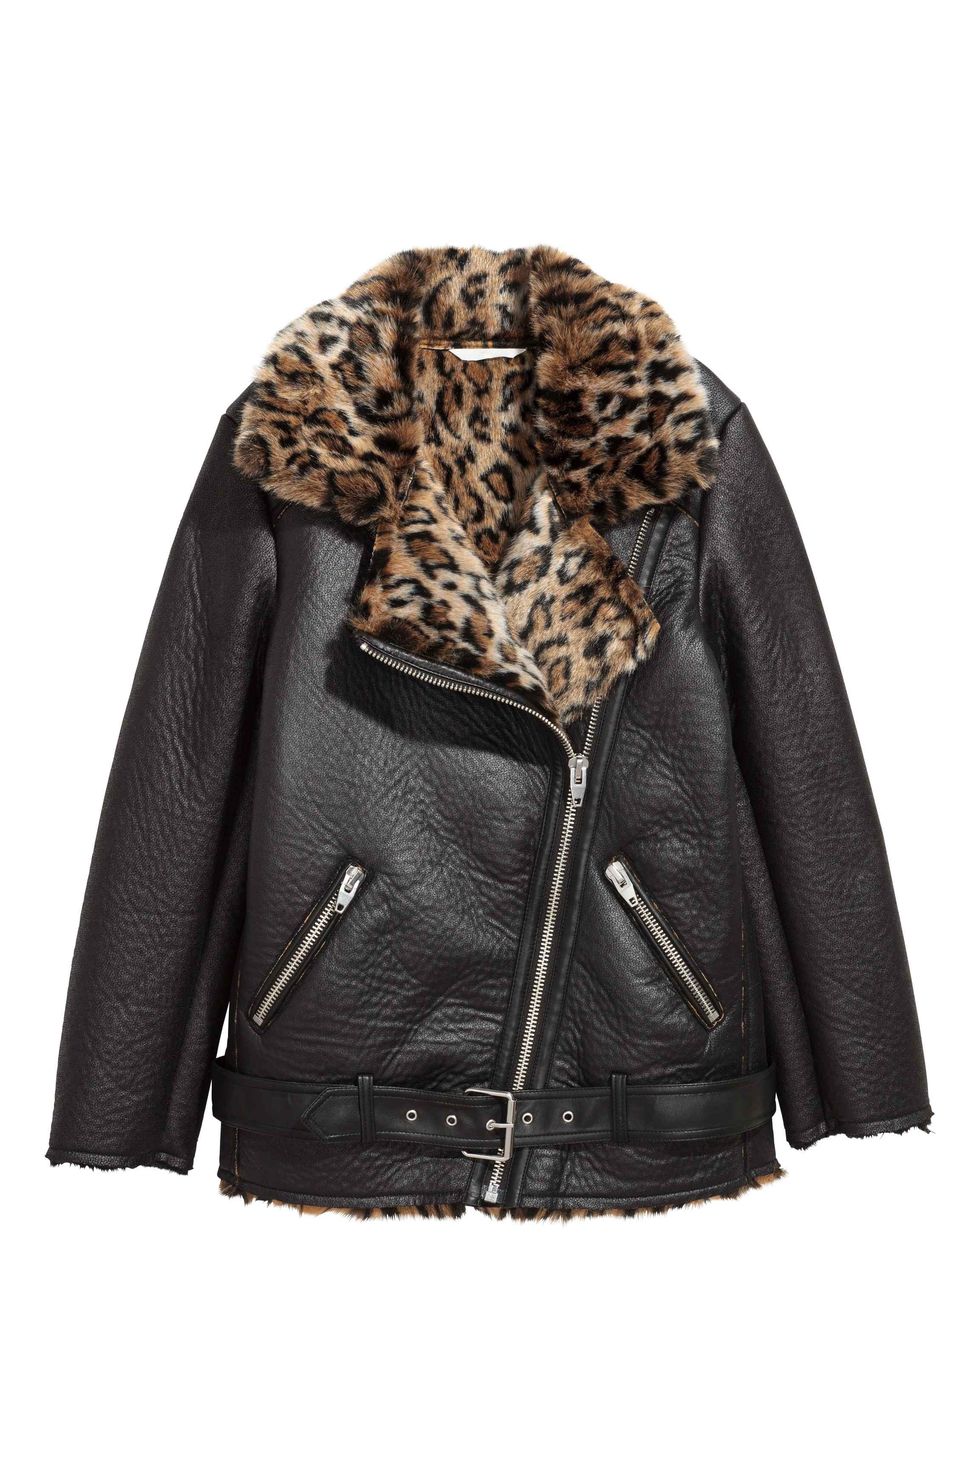 Clothing, Jacket, Outerwear, Leather, Leather jacket, Sleeve, Fur, Brown, Collar, Textile, 